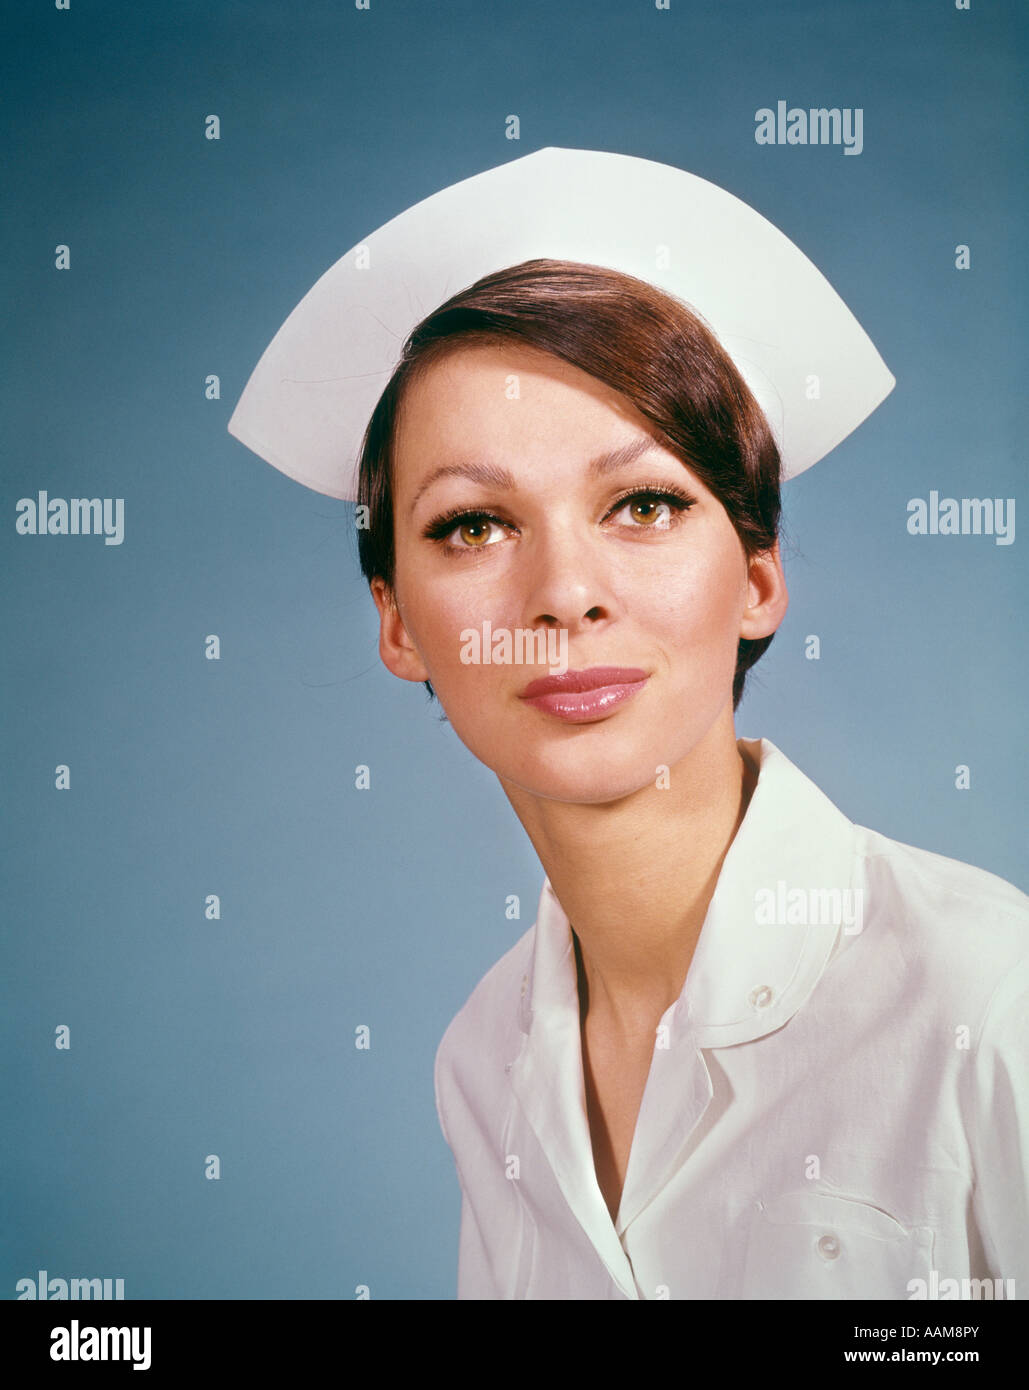 1960s PORTRAIT OF MEDICAL NURSE WEARING CAP AND WHITE UNIFORM REGISTERED PRACTICAL PROFESSION Stock Photo